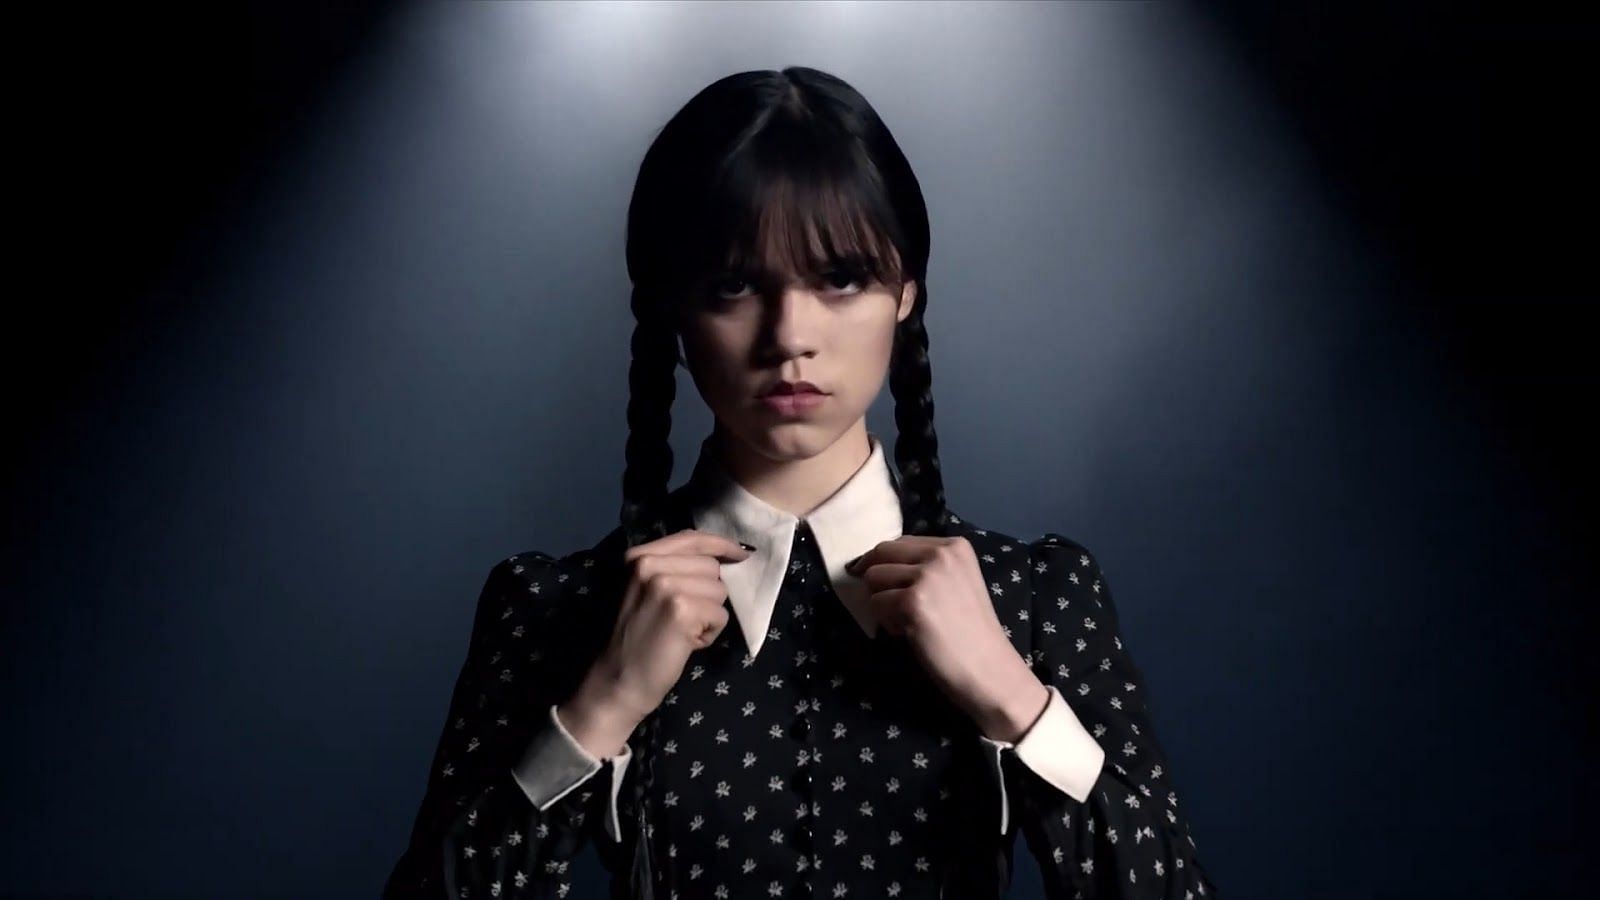 Wednesday Addams: A Look at the Name in 16 Languages